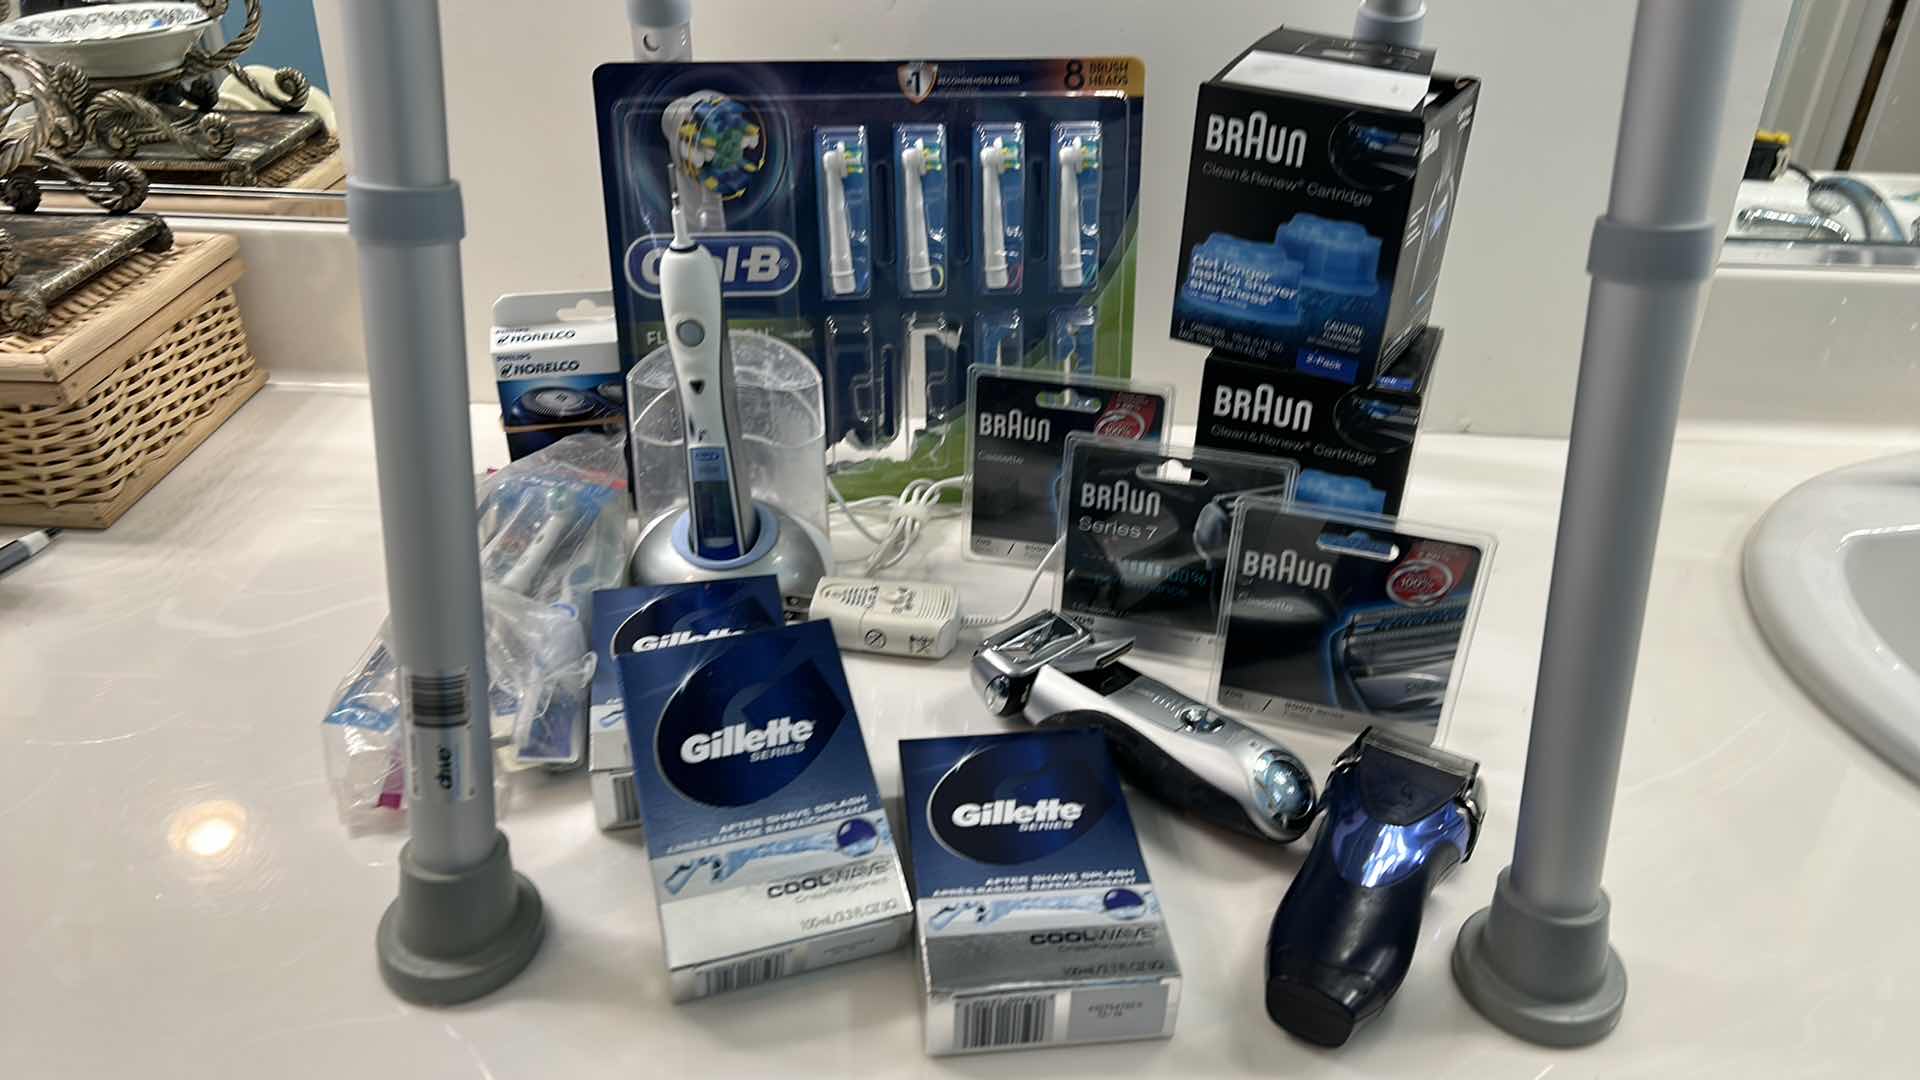 Photo 2 of BRAUN RAZOR, ORAL B, ACCESSORIES AND SHOWER CHAIR